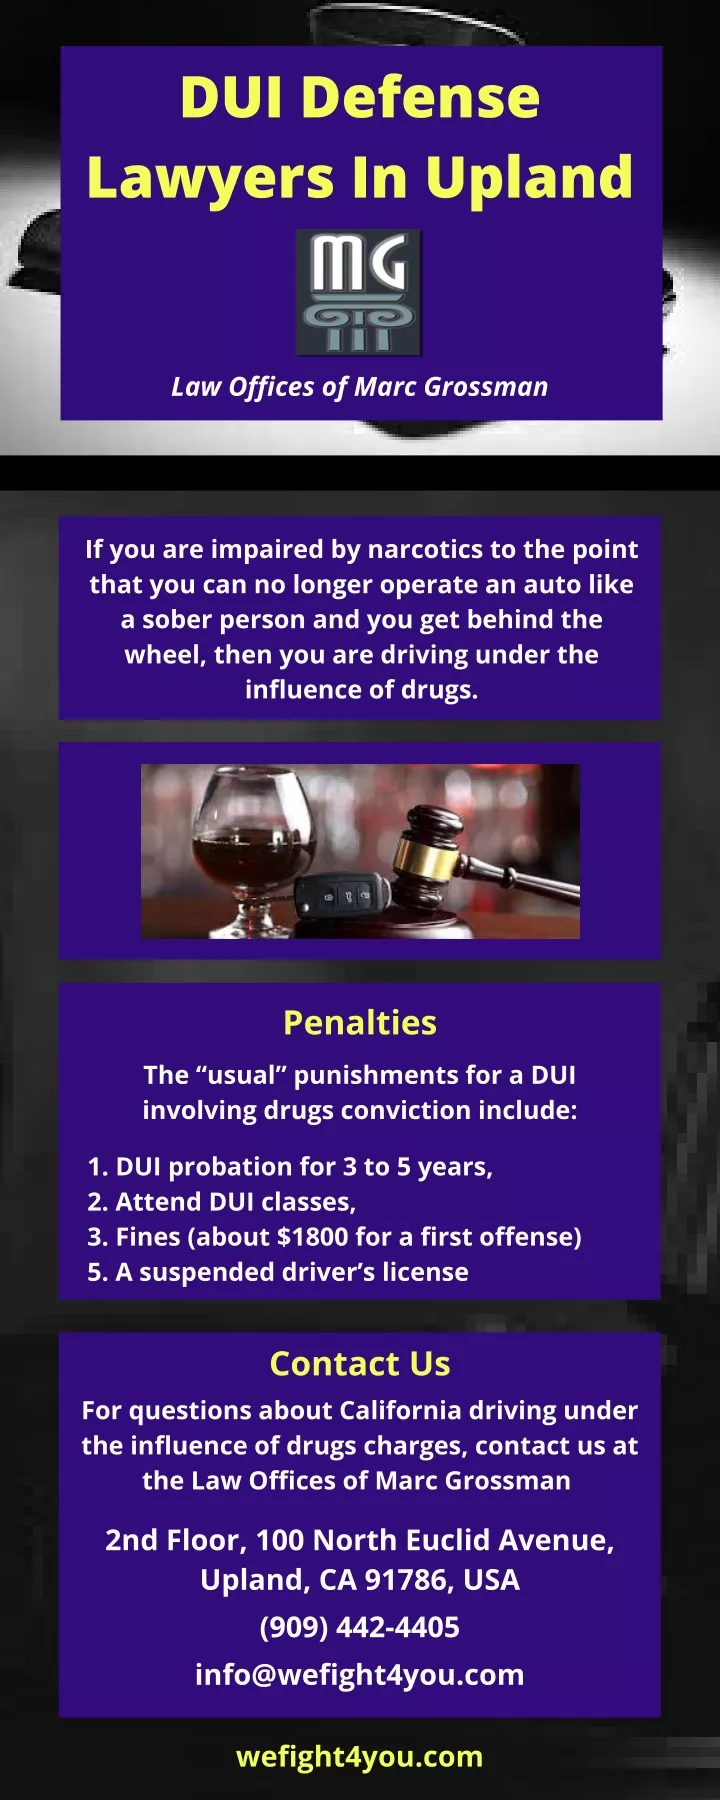 dui defense lawyers in upland